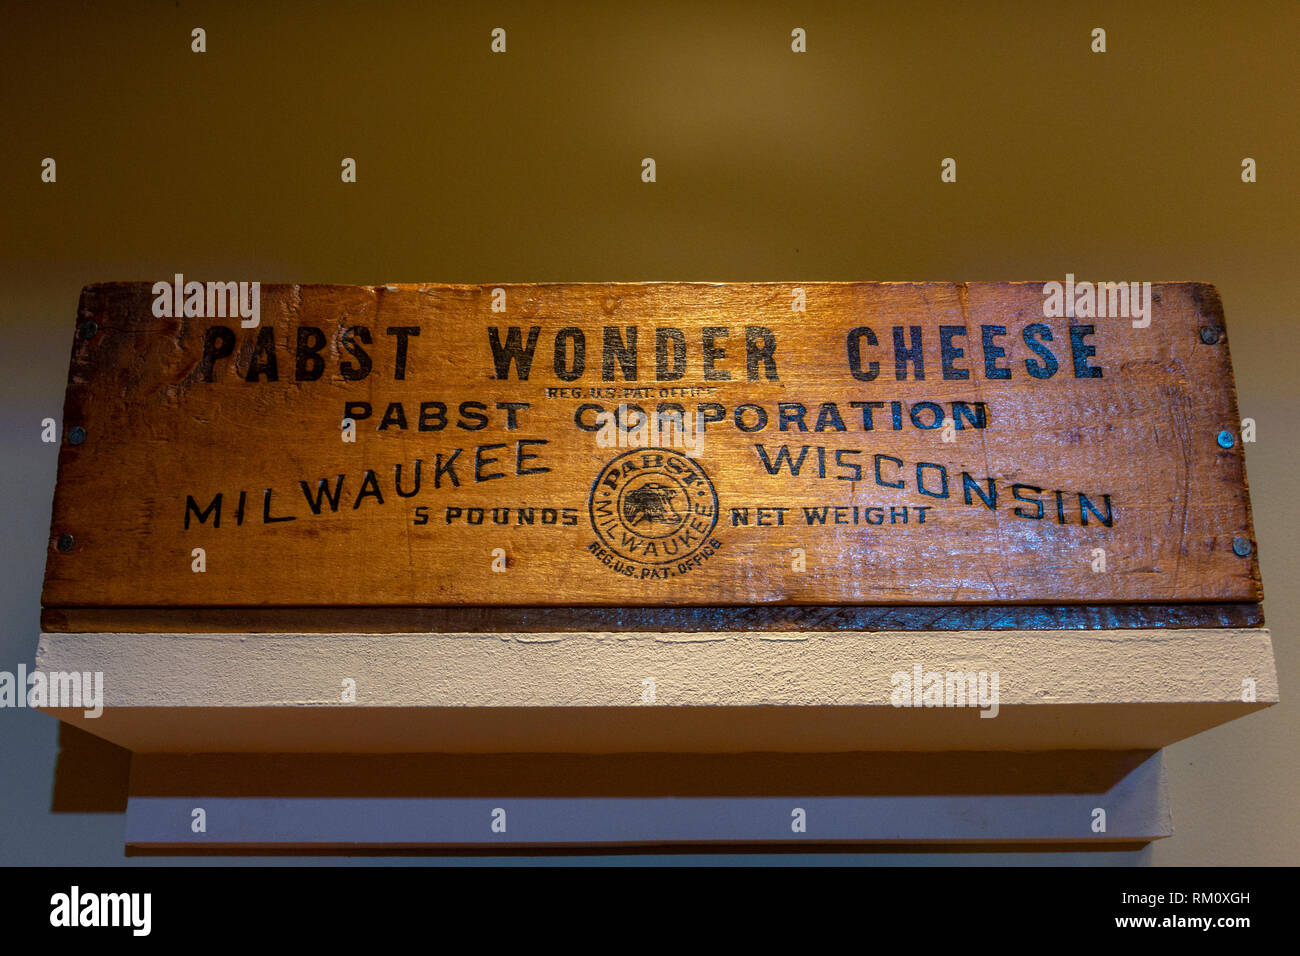 Crate of Pabst Wonder Cheese sold during Prohibition, The Mob Museum, Las Vegas (City of Las Vegas), Nevada, United States. Stock Photo